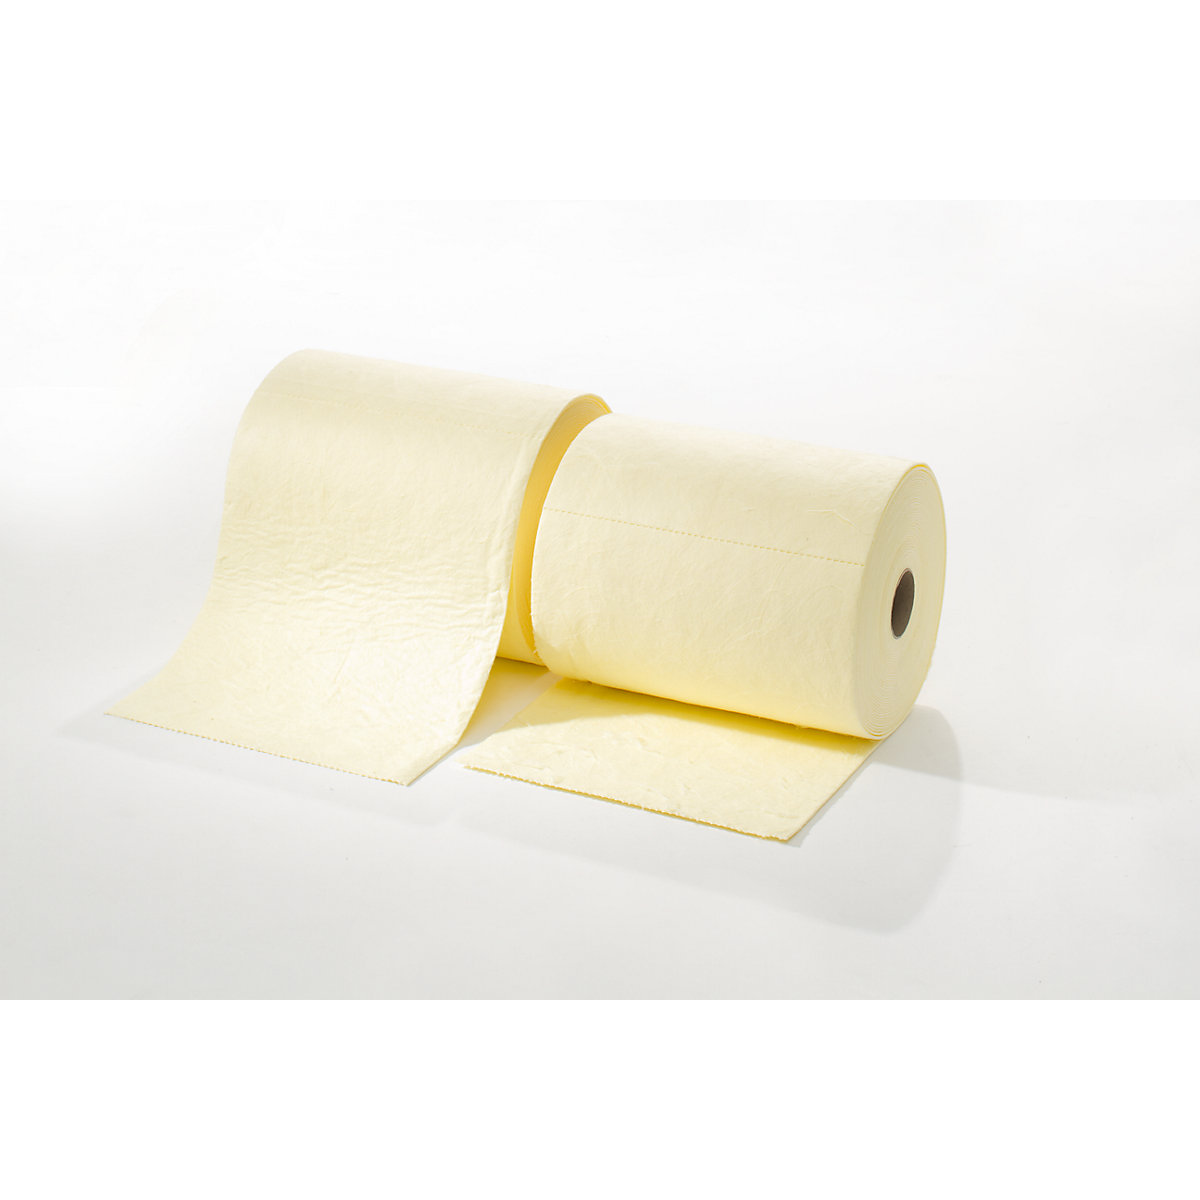 FIRST absorbent sheeting, roll of sheeting, heavy version, for chemicals, 400 mm x 40 m, pack of 2 rolls-13